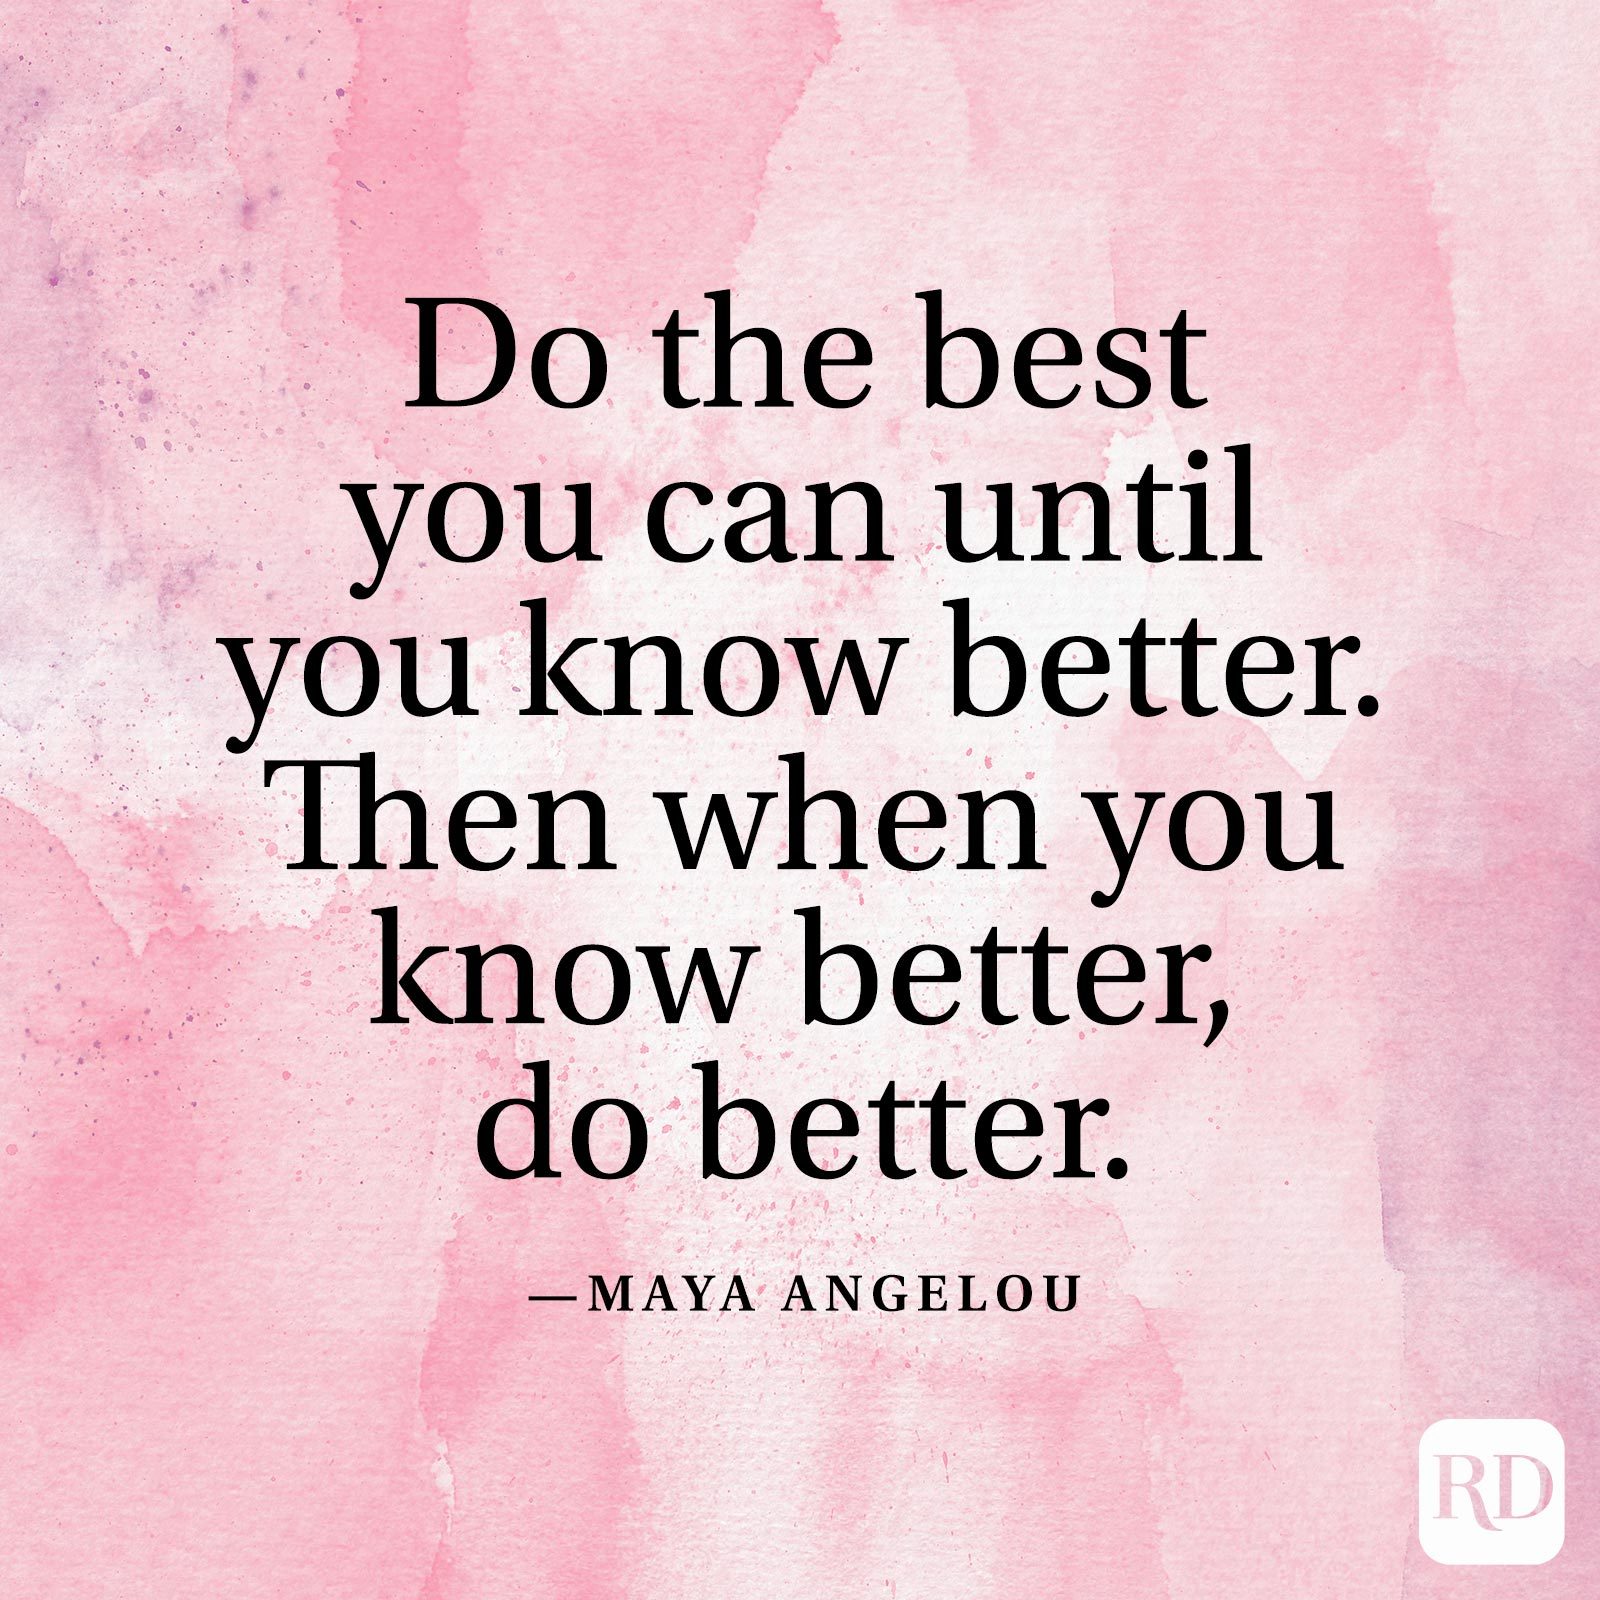 "Do the best you can until you know better. Then when you know better, do better." —Maya Angelou